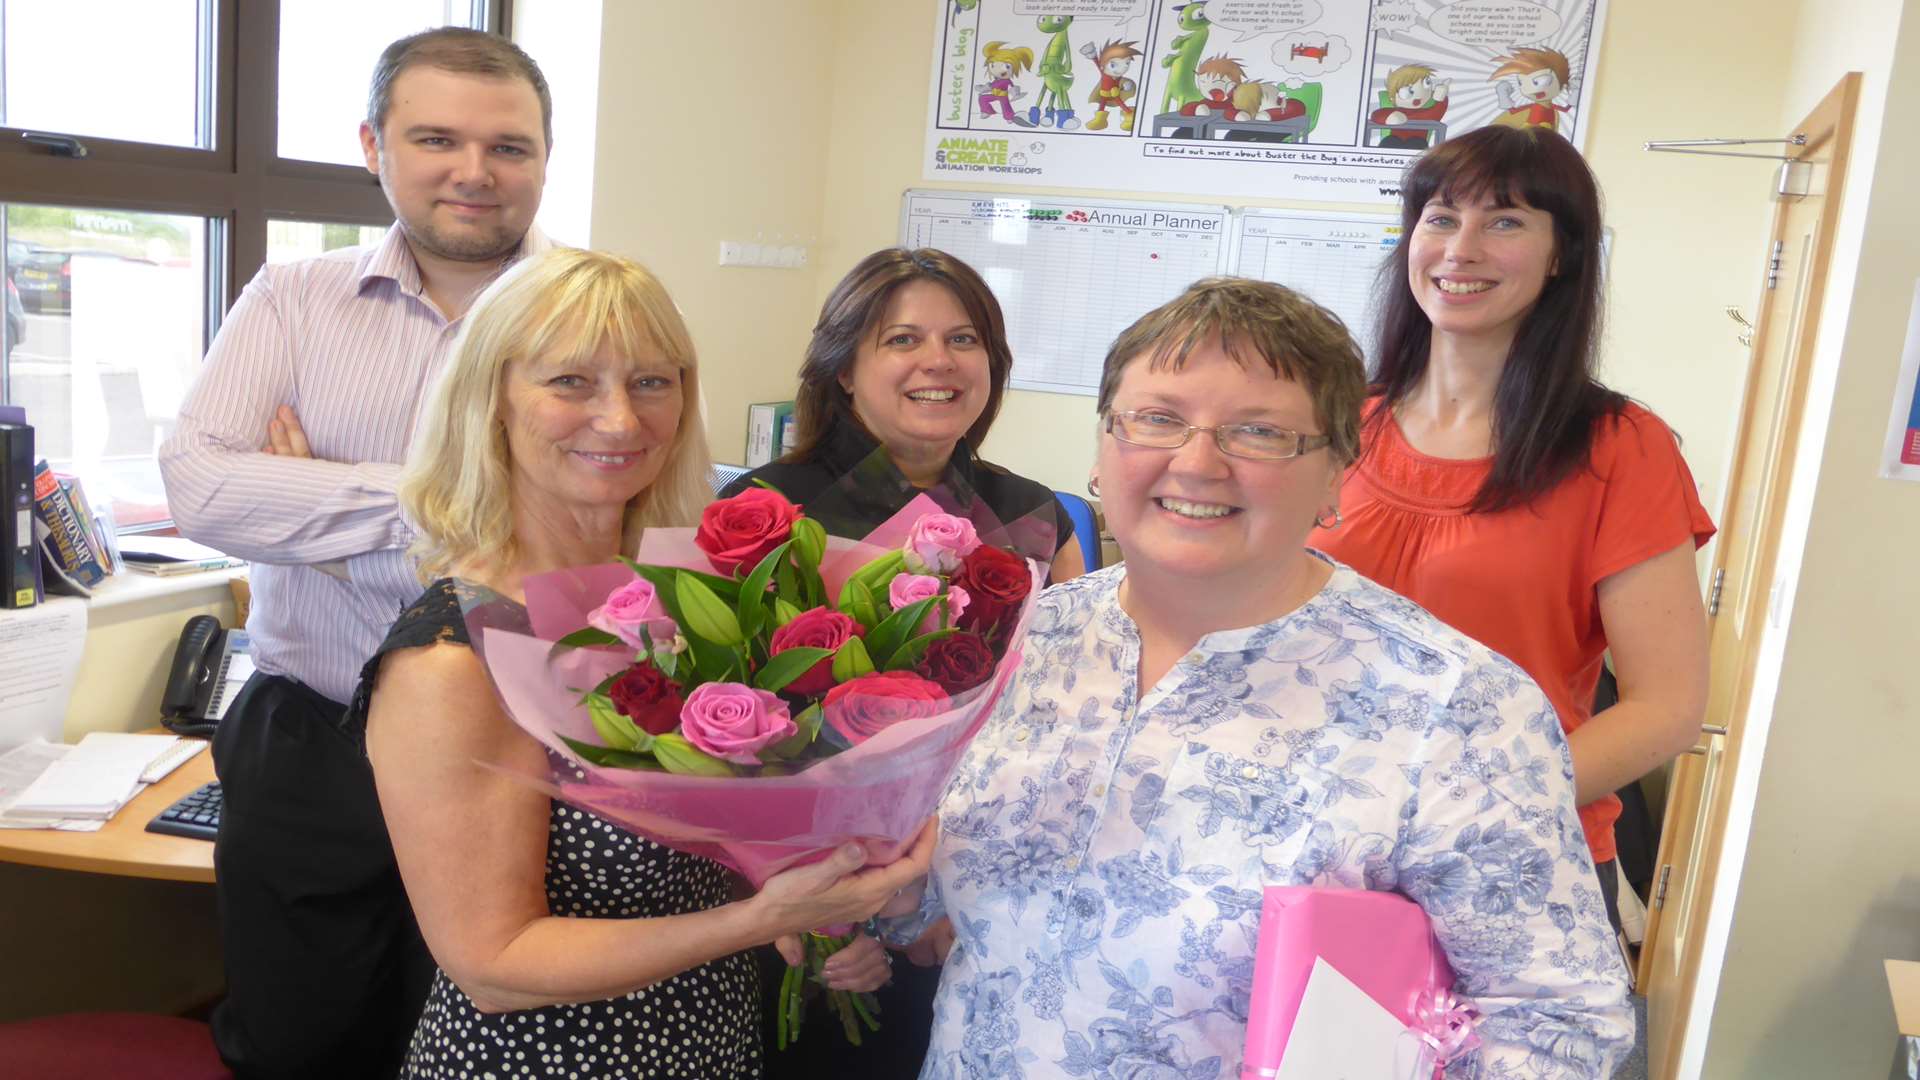 Louise Rogerson (front, left) and KM Charity Team staff present volunteer Brenda Loach with her retirement gifts.